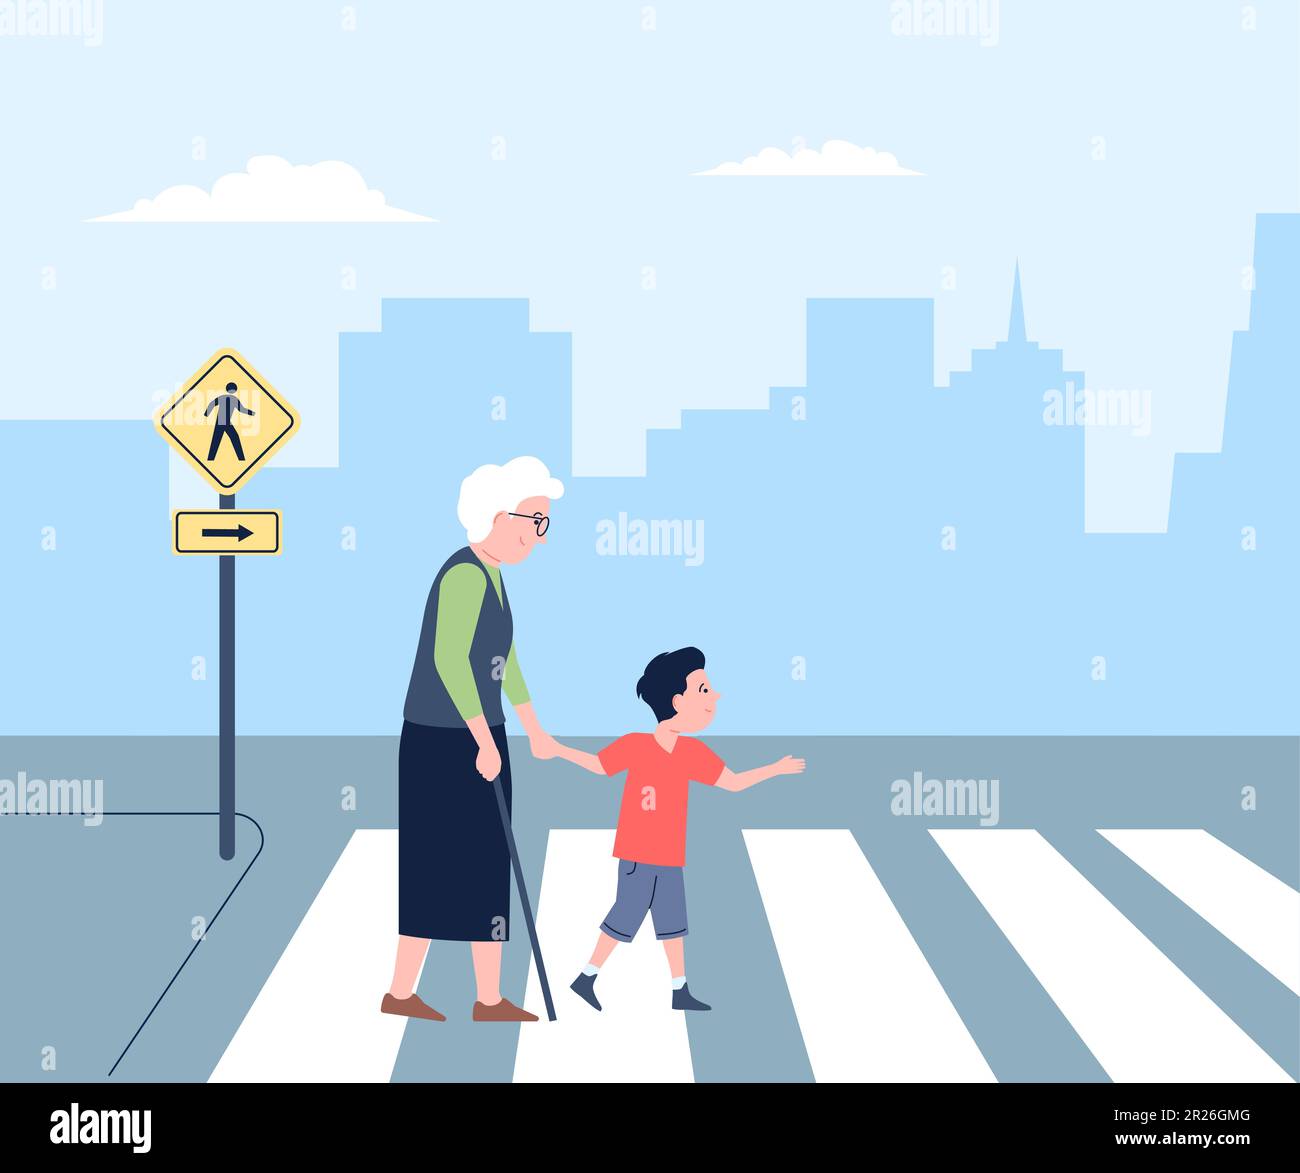 Polite child, courtesies and kindness. Good manner, kid helping senior person cross the road. Behavior younger with older recent vector scene Stock Vector